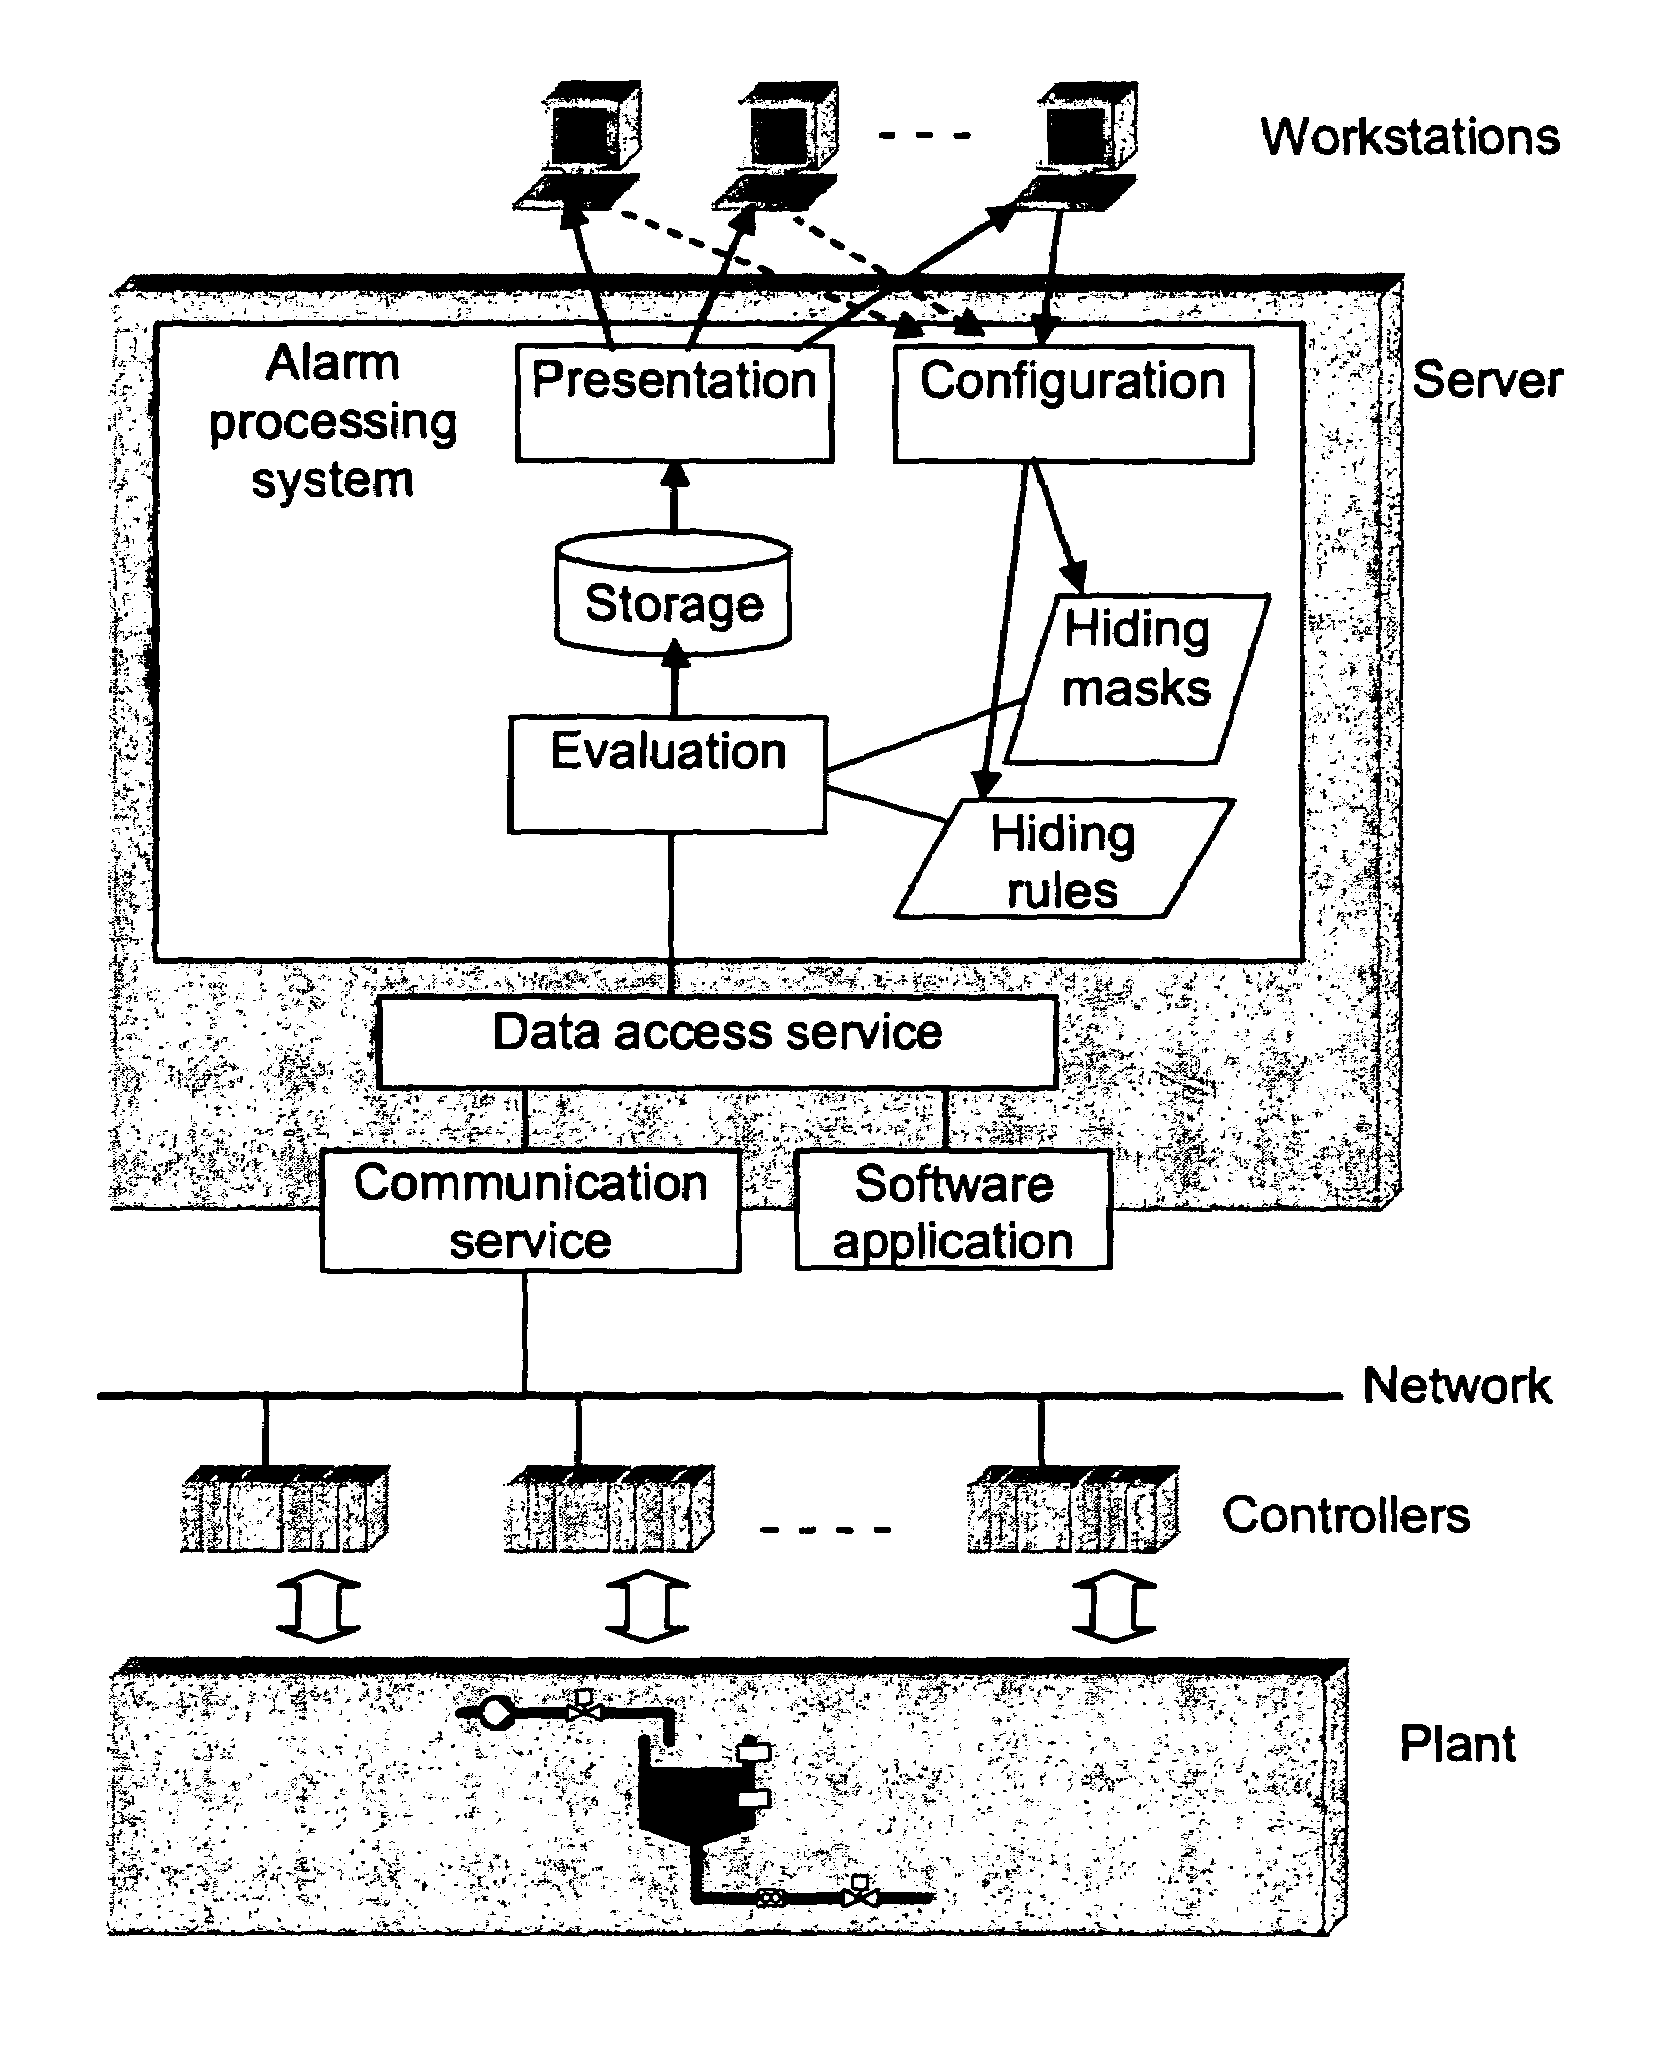 Method and system for automatically deciding what alarm, generated in an industrial plant, to hide or to present to an operator